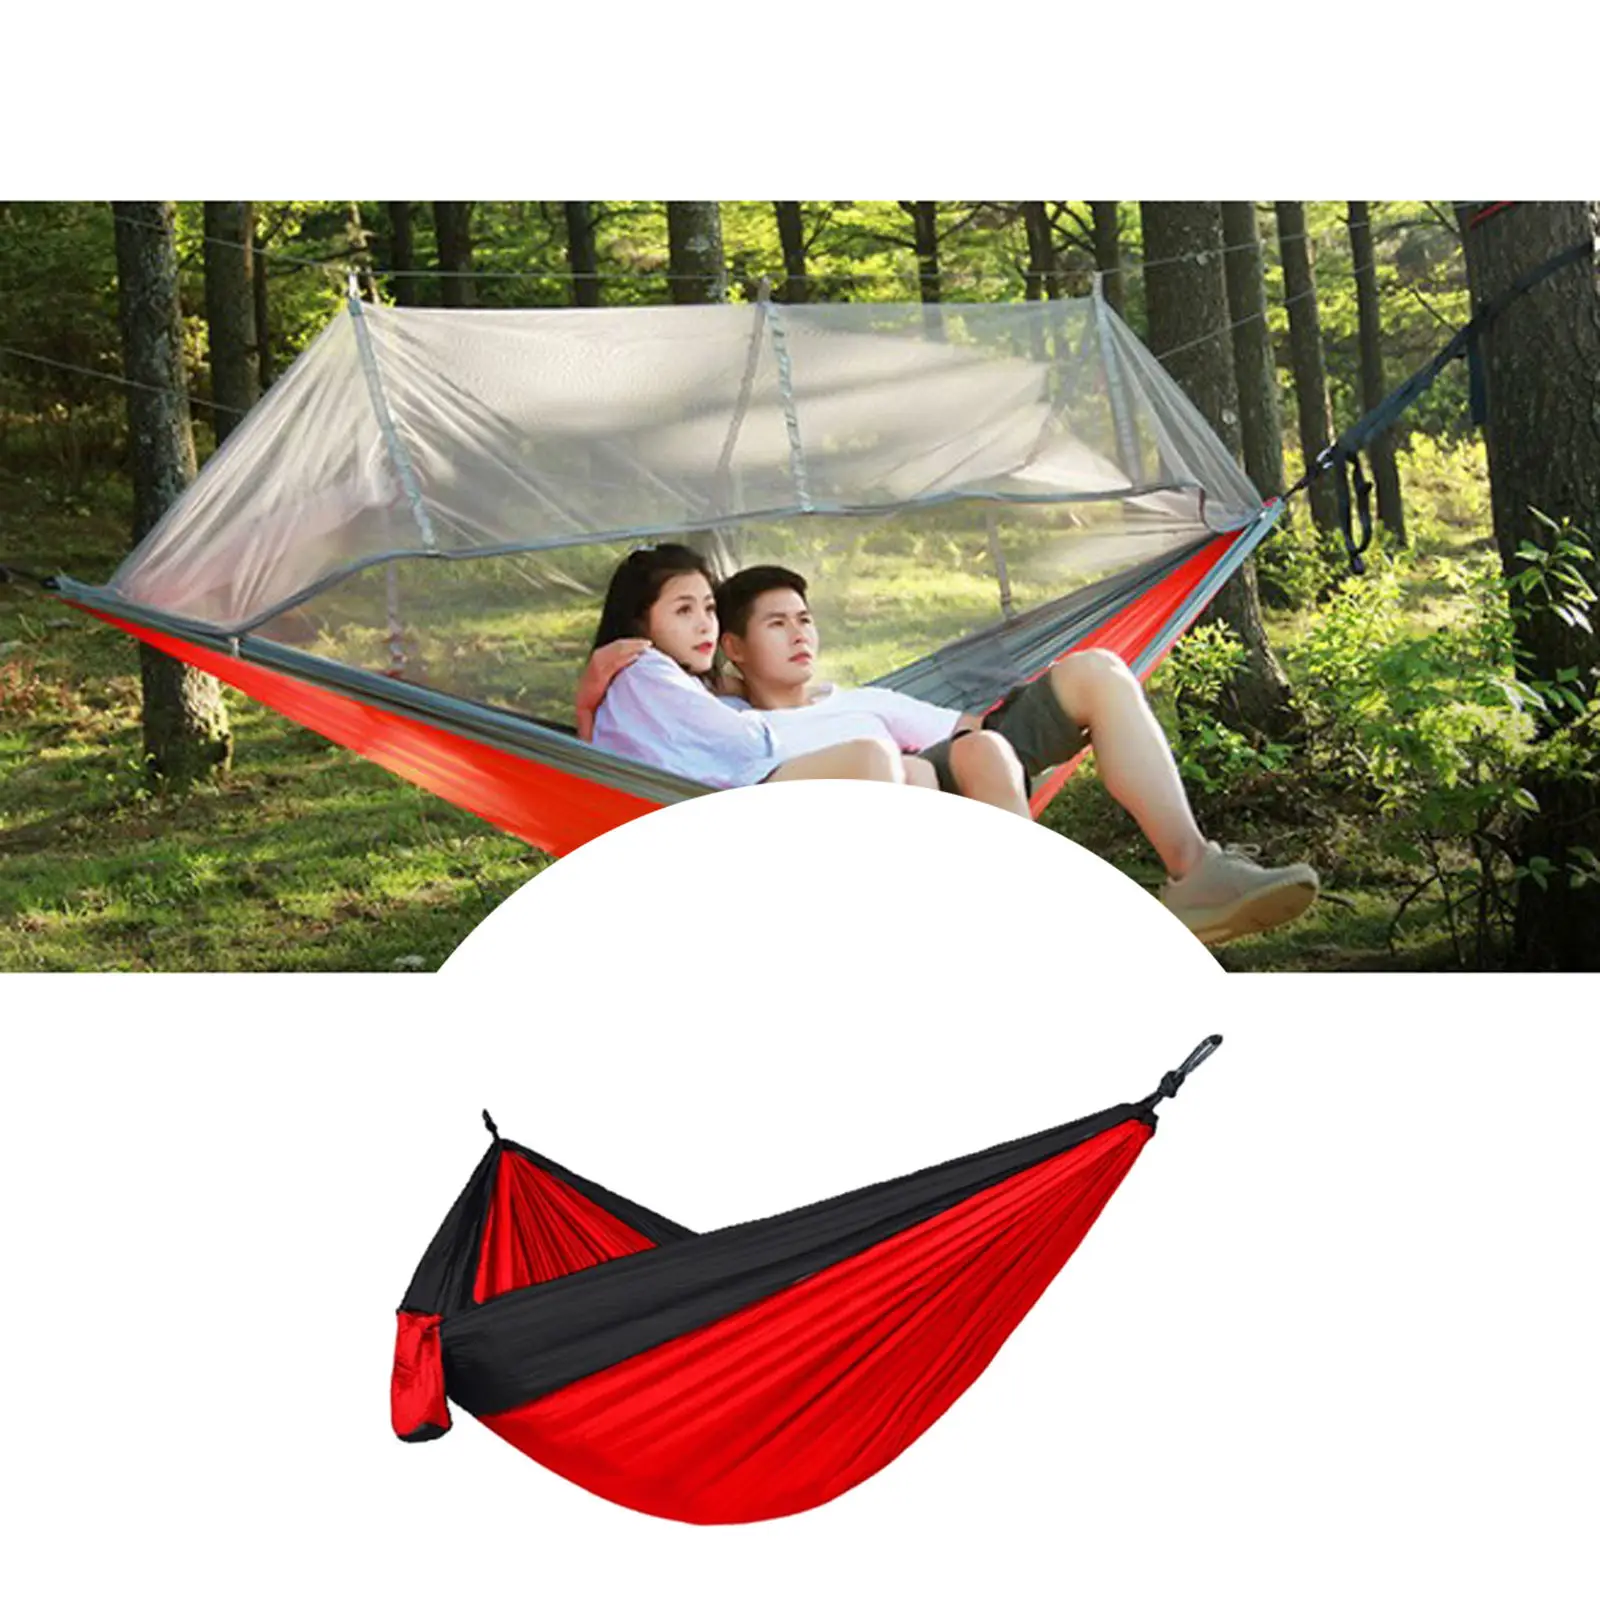 270x140cm ing Hammock Double Adult Strong Swing Chair Travel Camping Sleeping Bed Outdoor Furniture